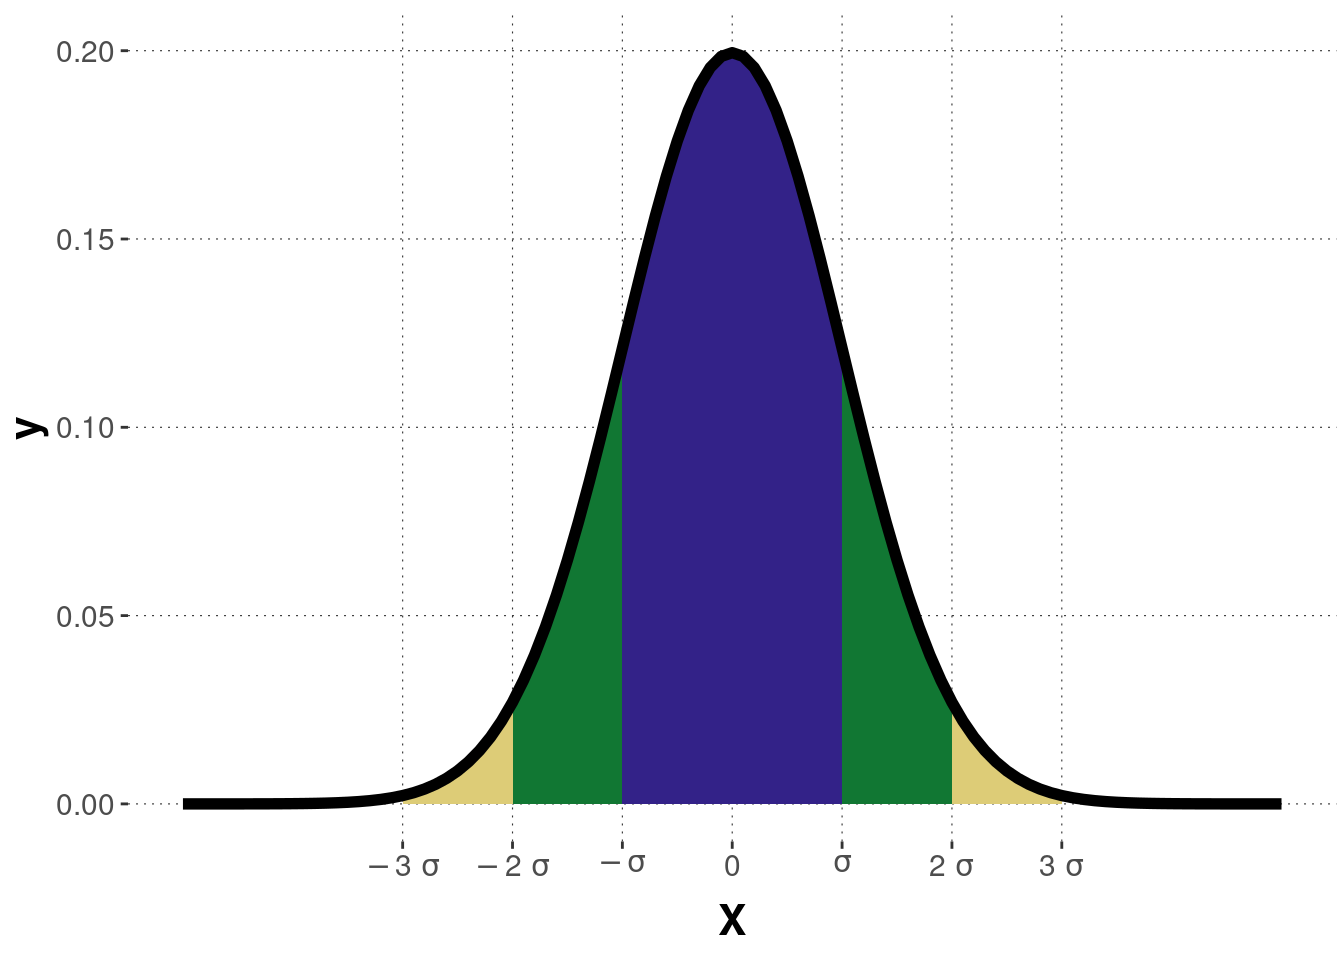 The coverage of a normal distribution.